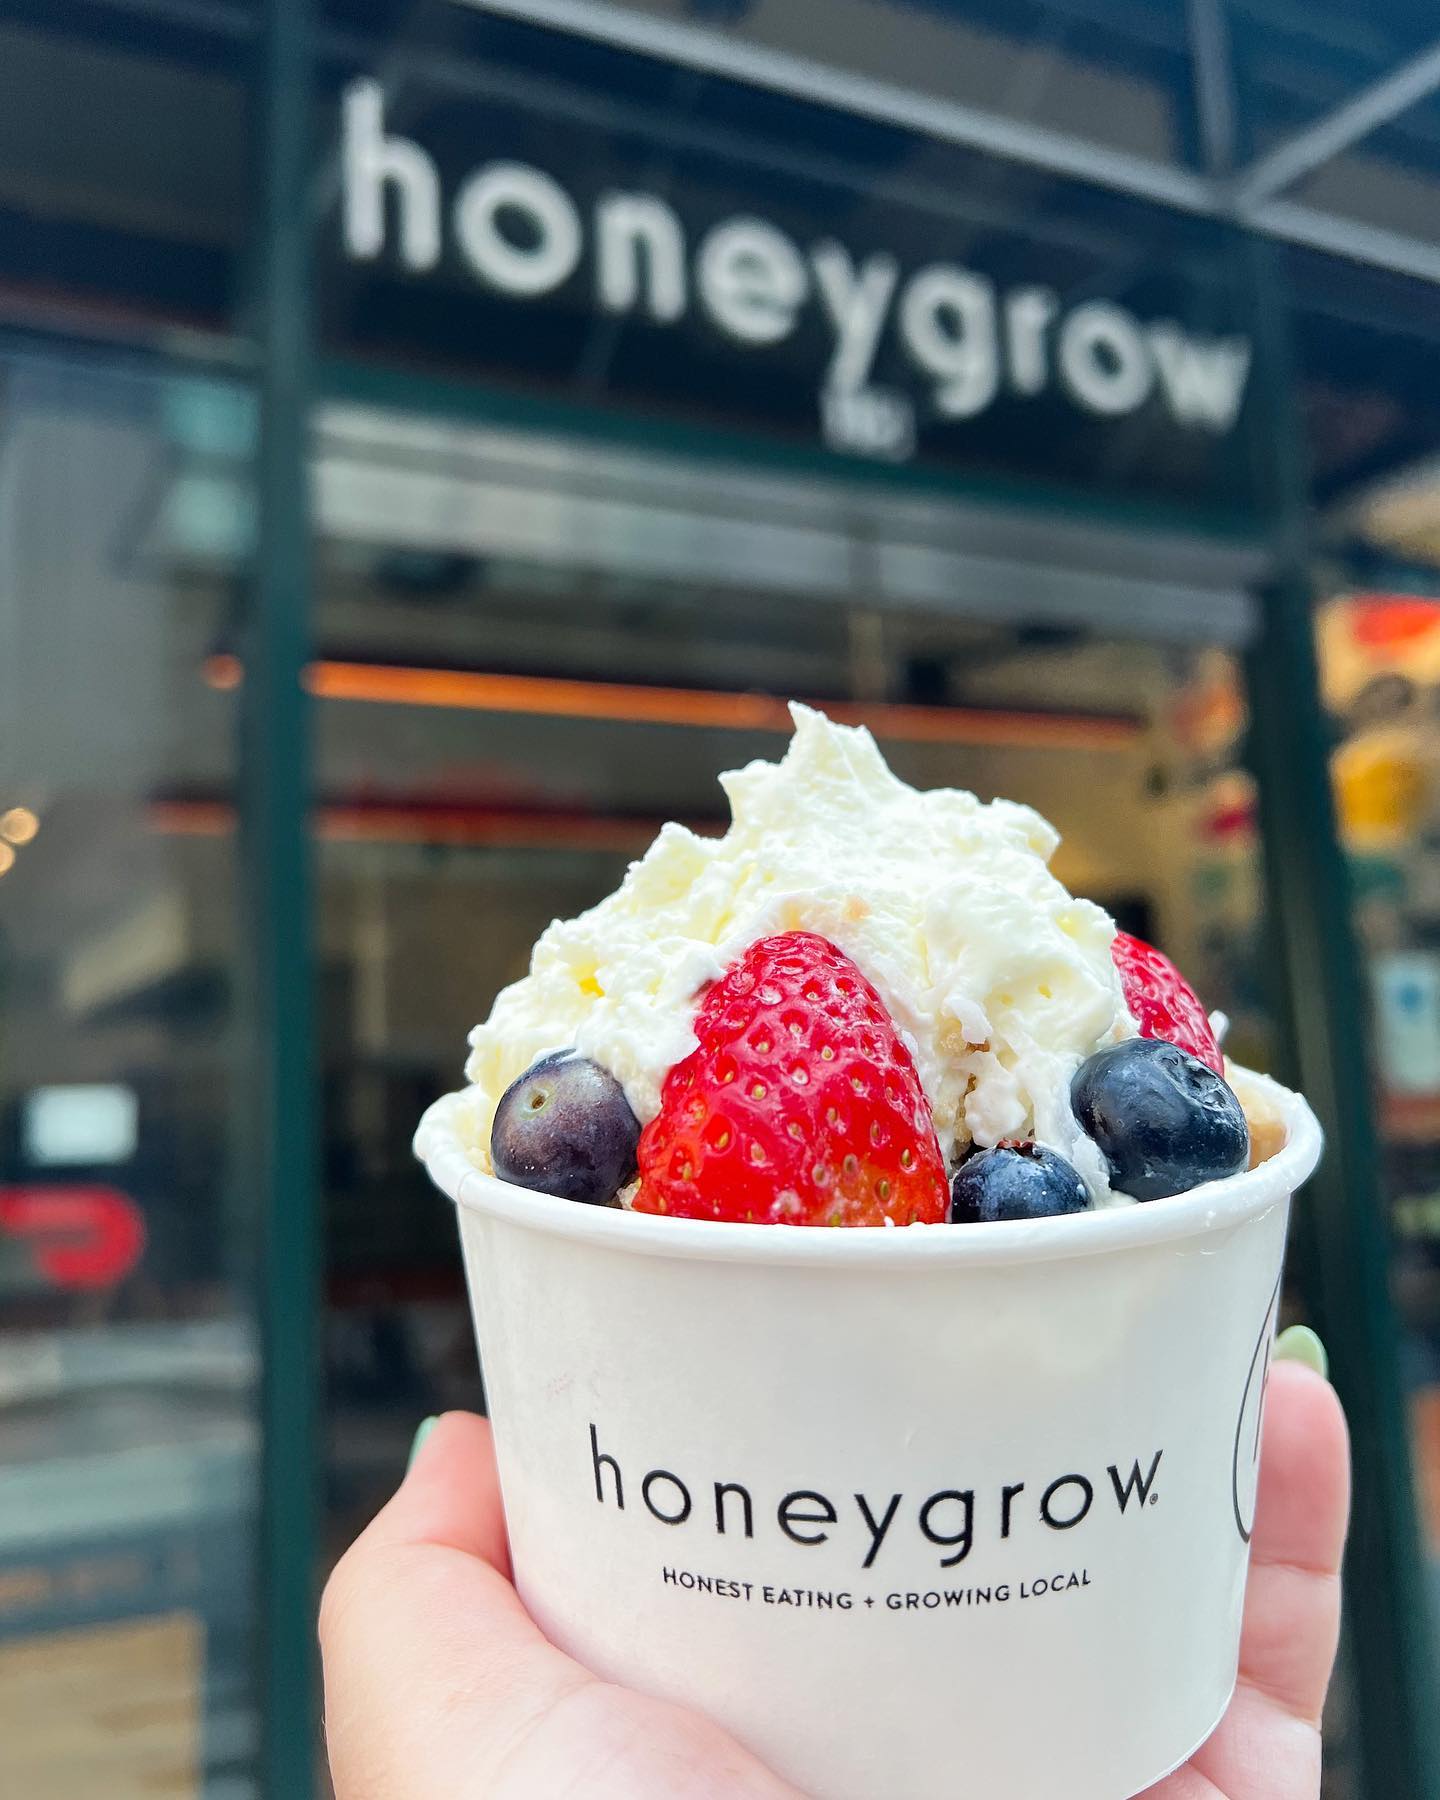 one of the desserts offered at the honeygrow menu